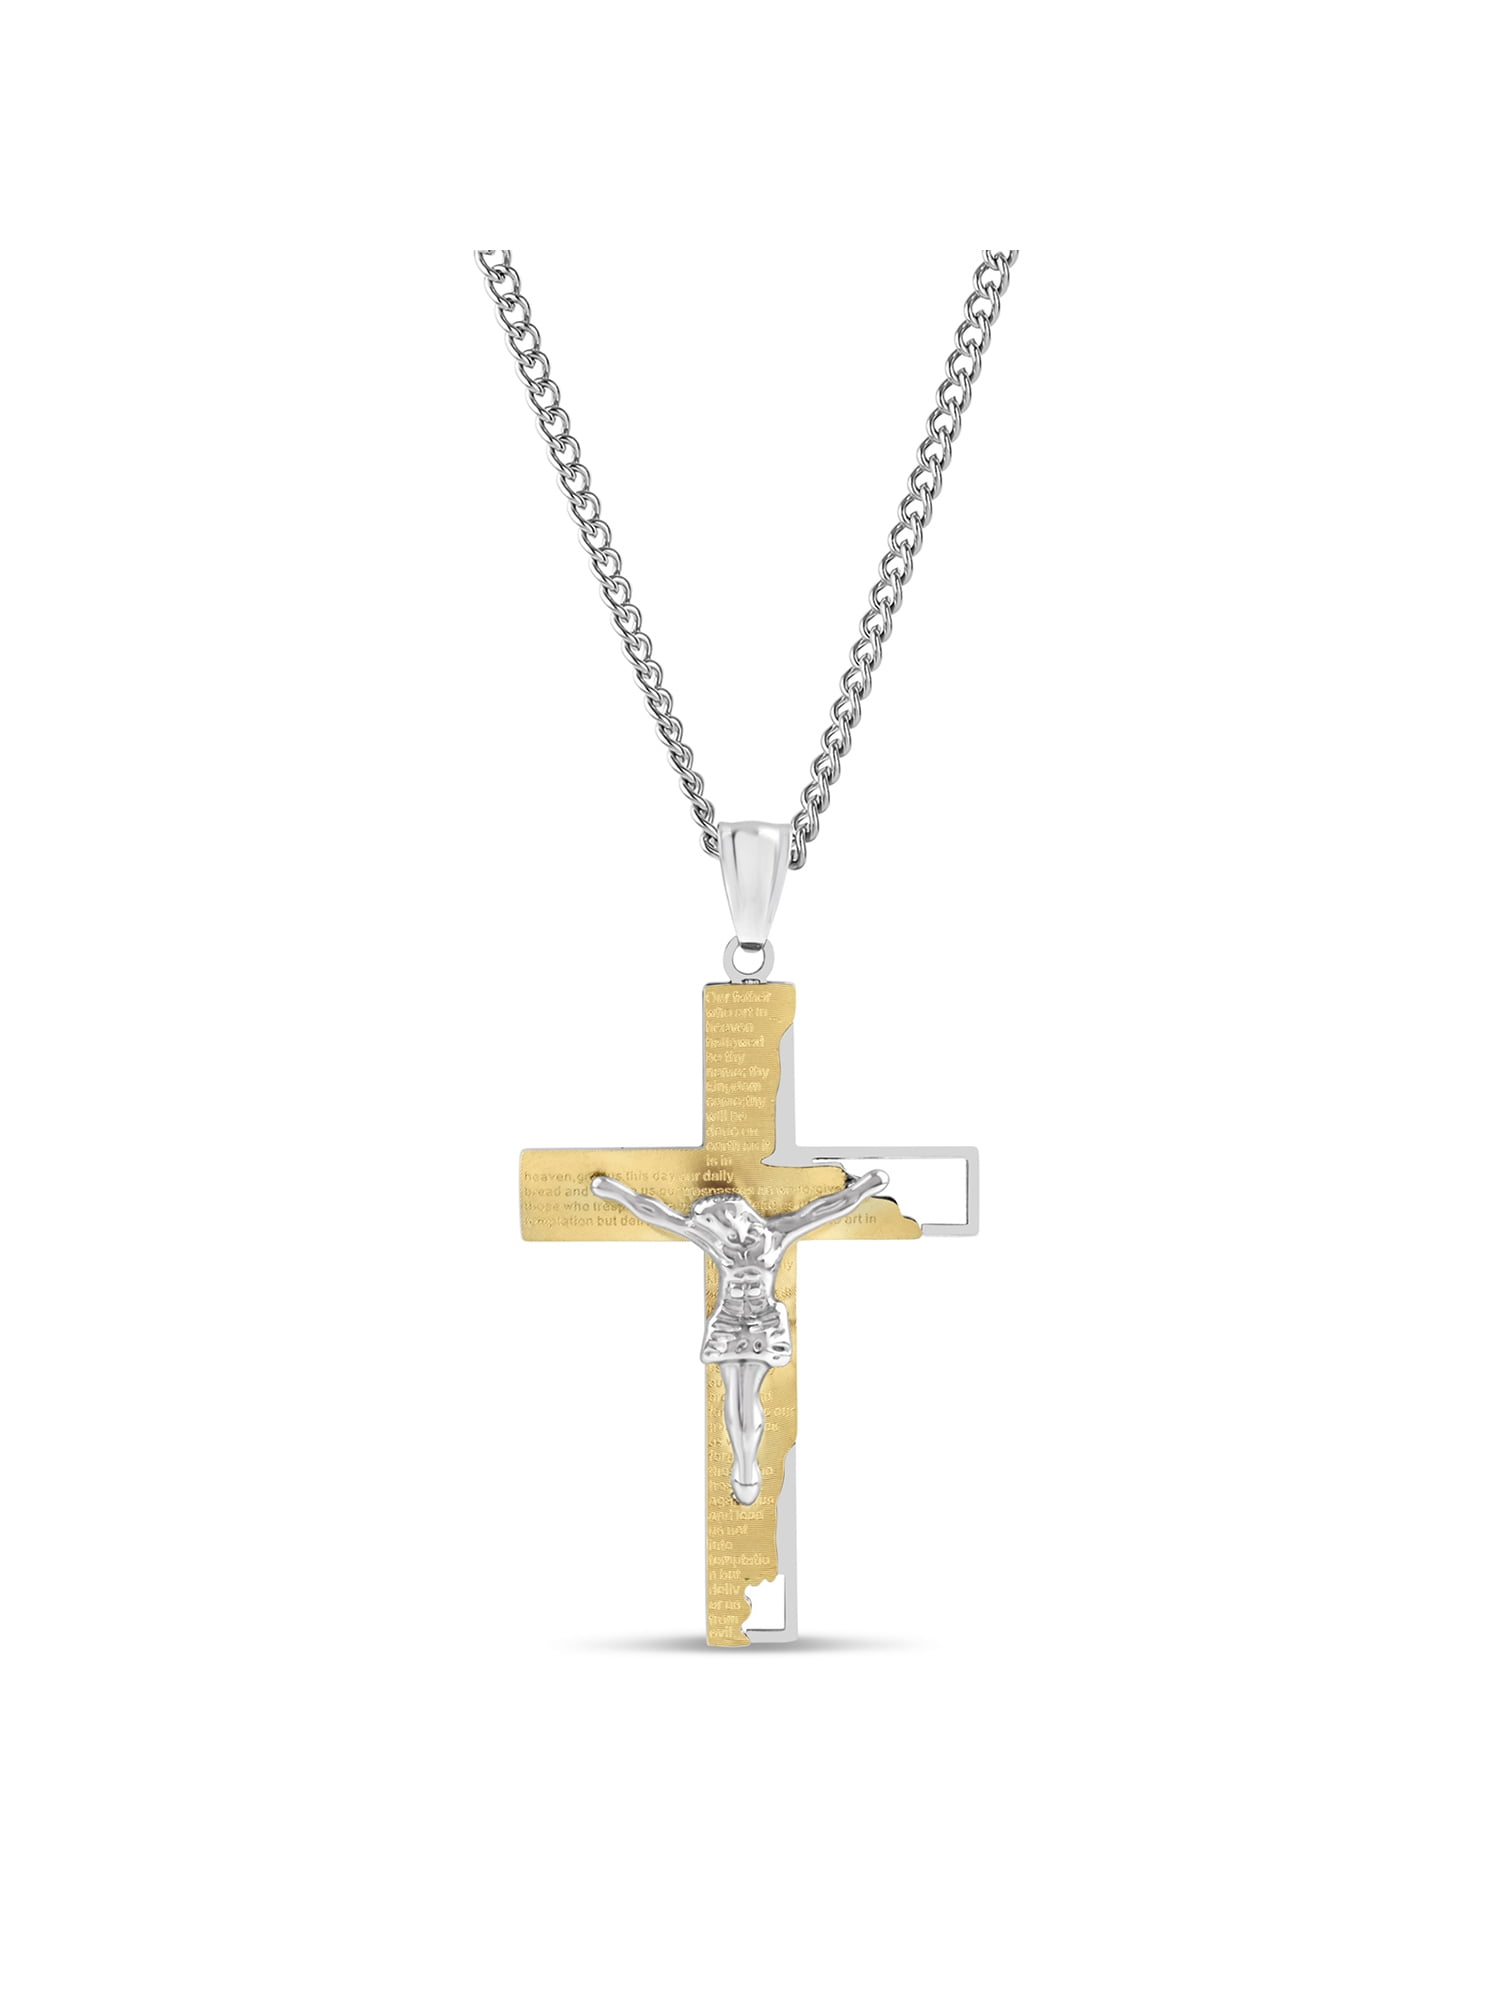 Western Scroll Cross Necklace | Sisters Boutique & Gifts, Inc.